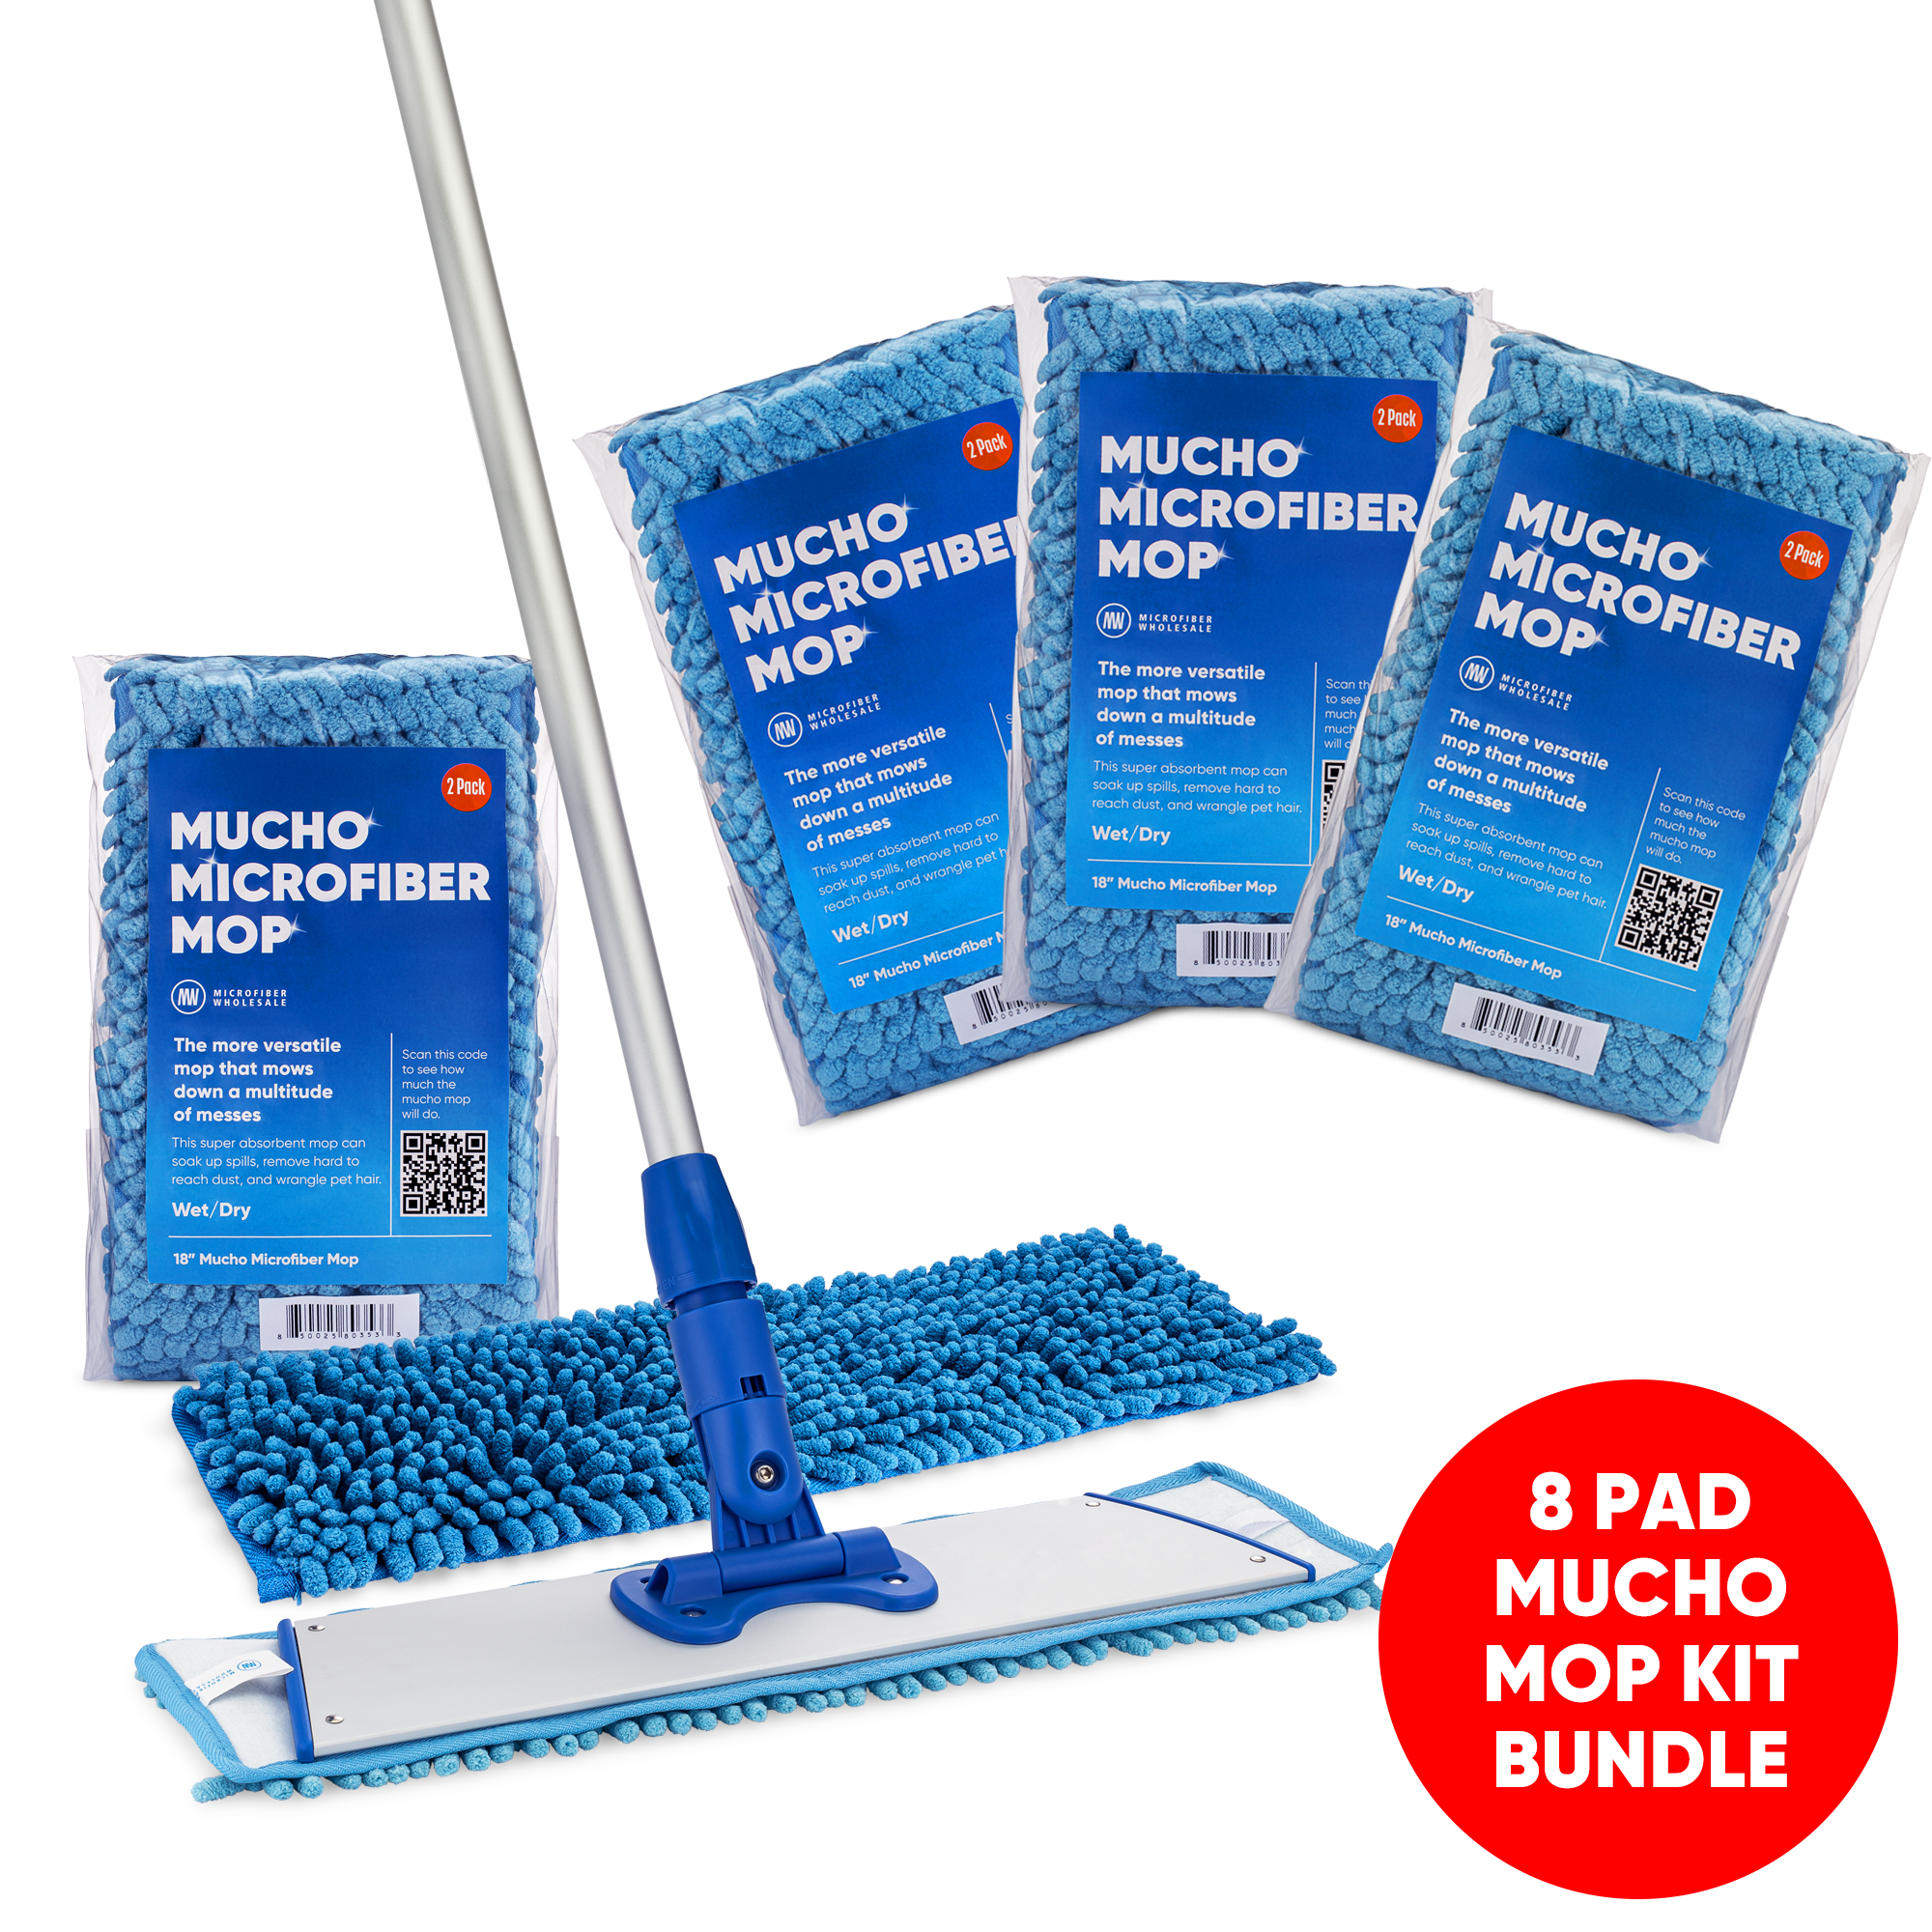 18" Mucho Mop kit with Extra Pads Bundle Kit